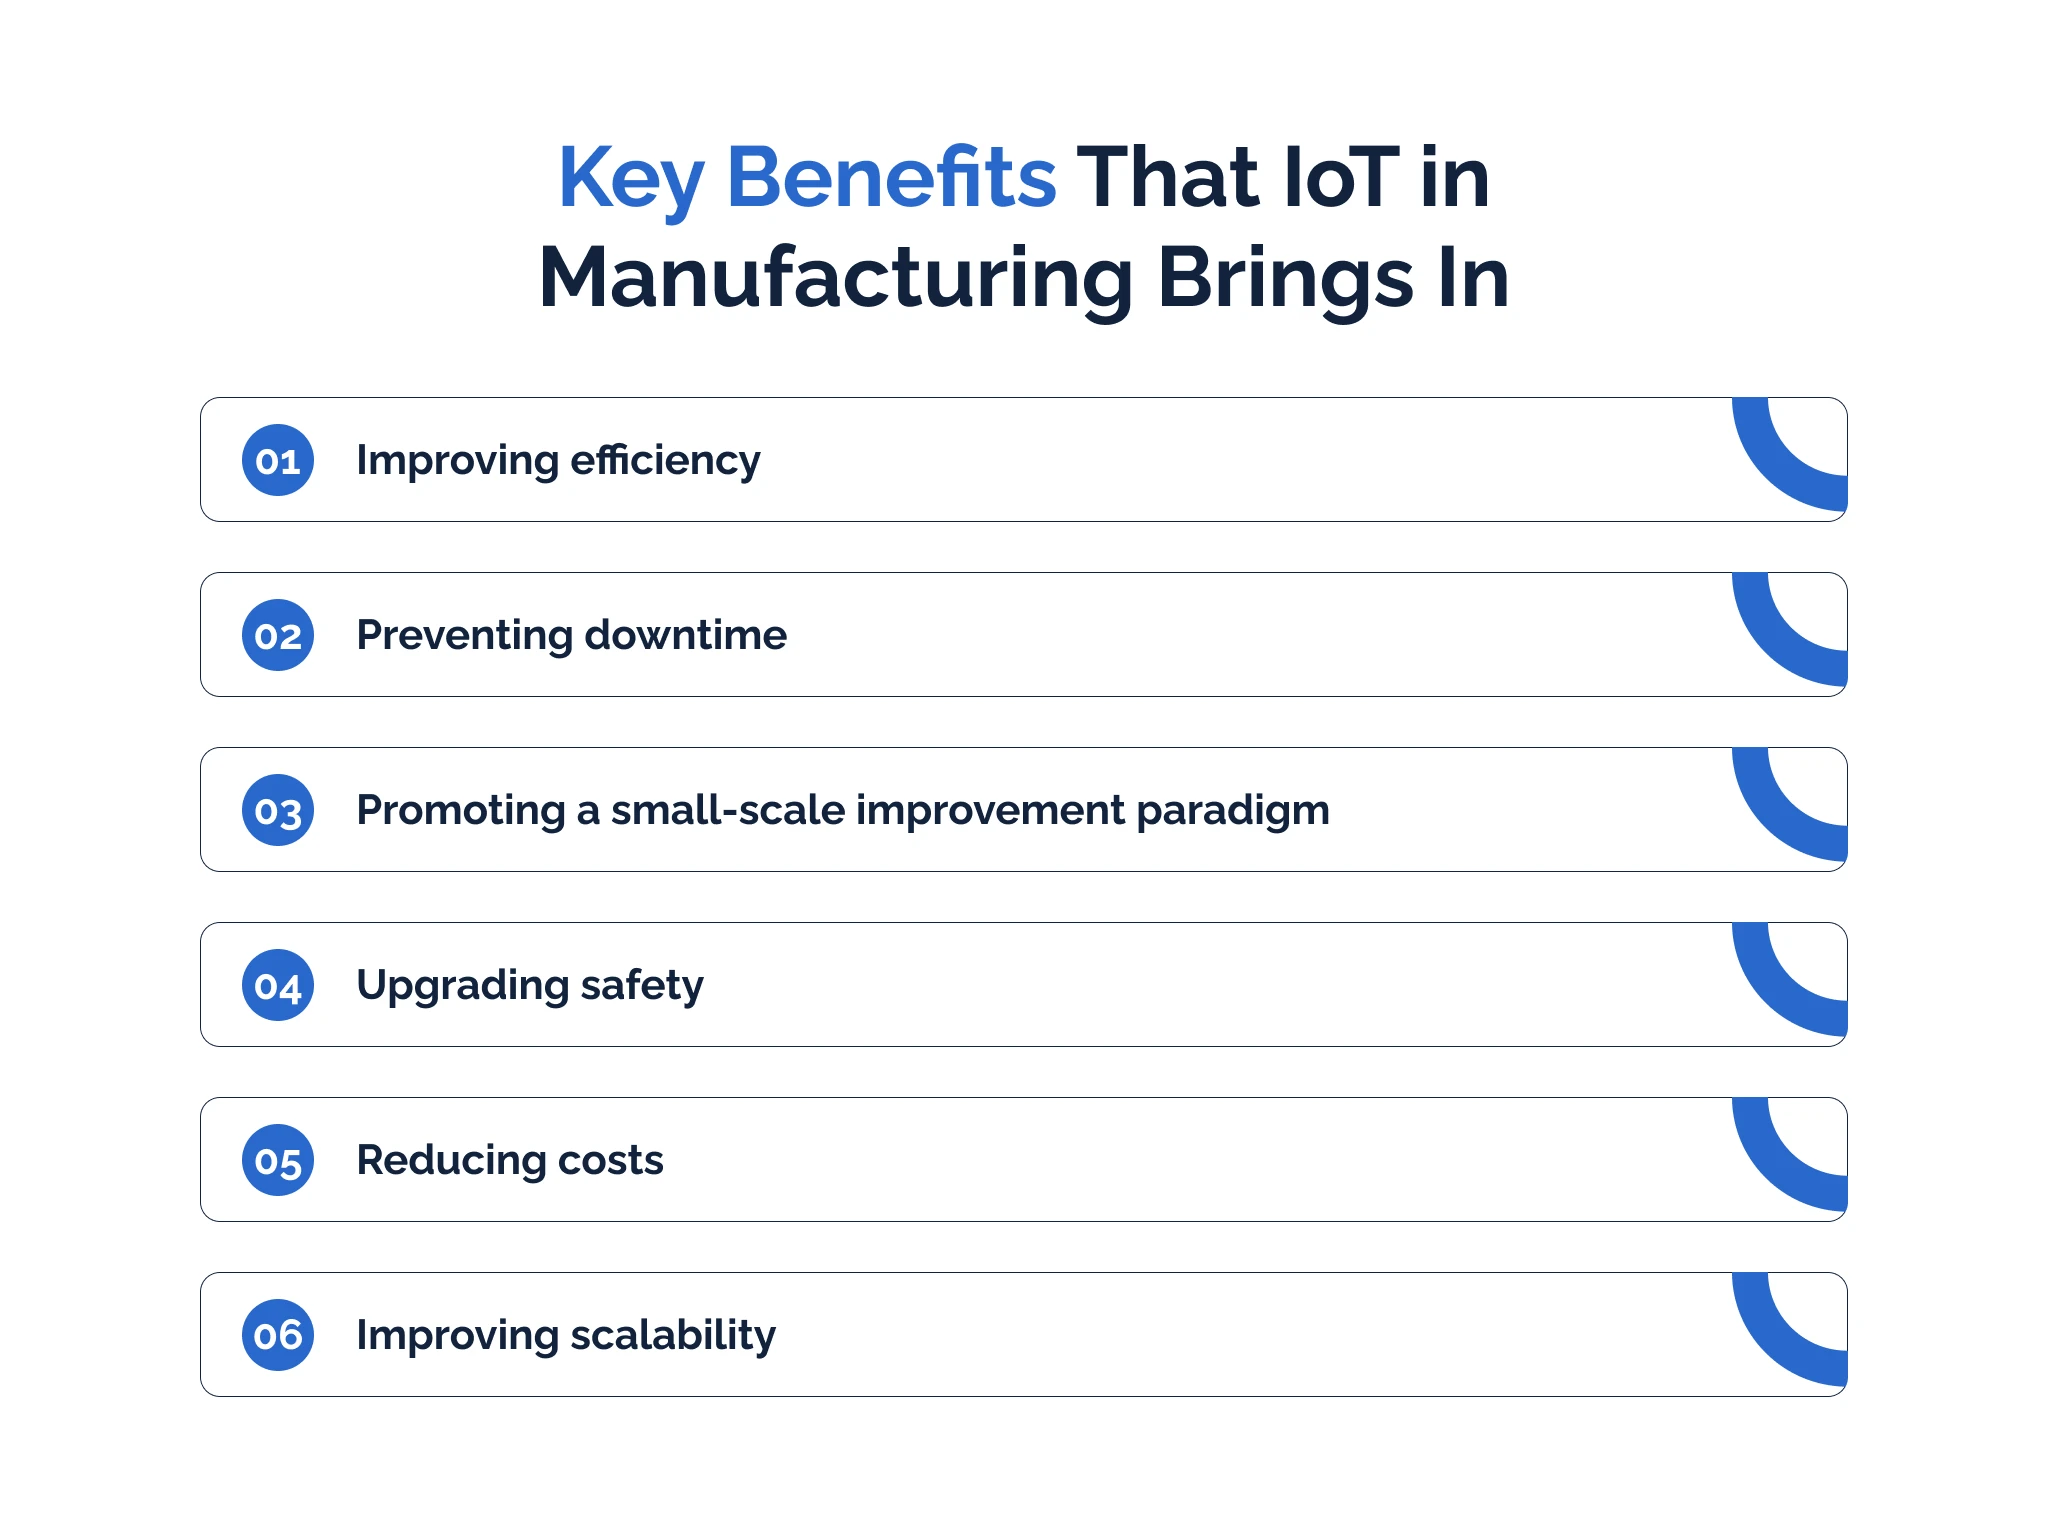 Key benefits that IoT in manufacturing brings in